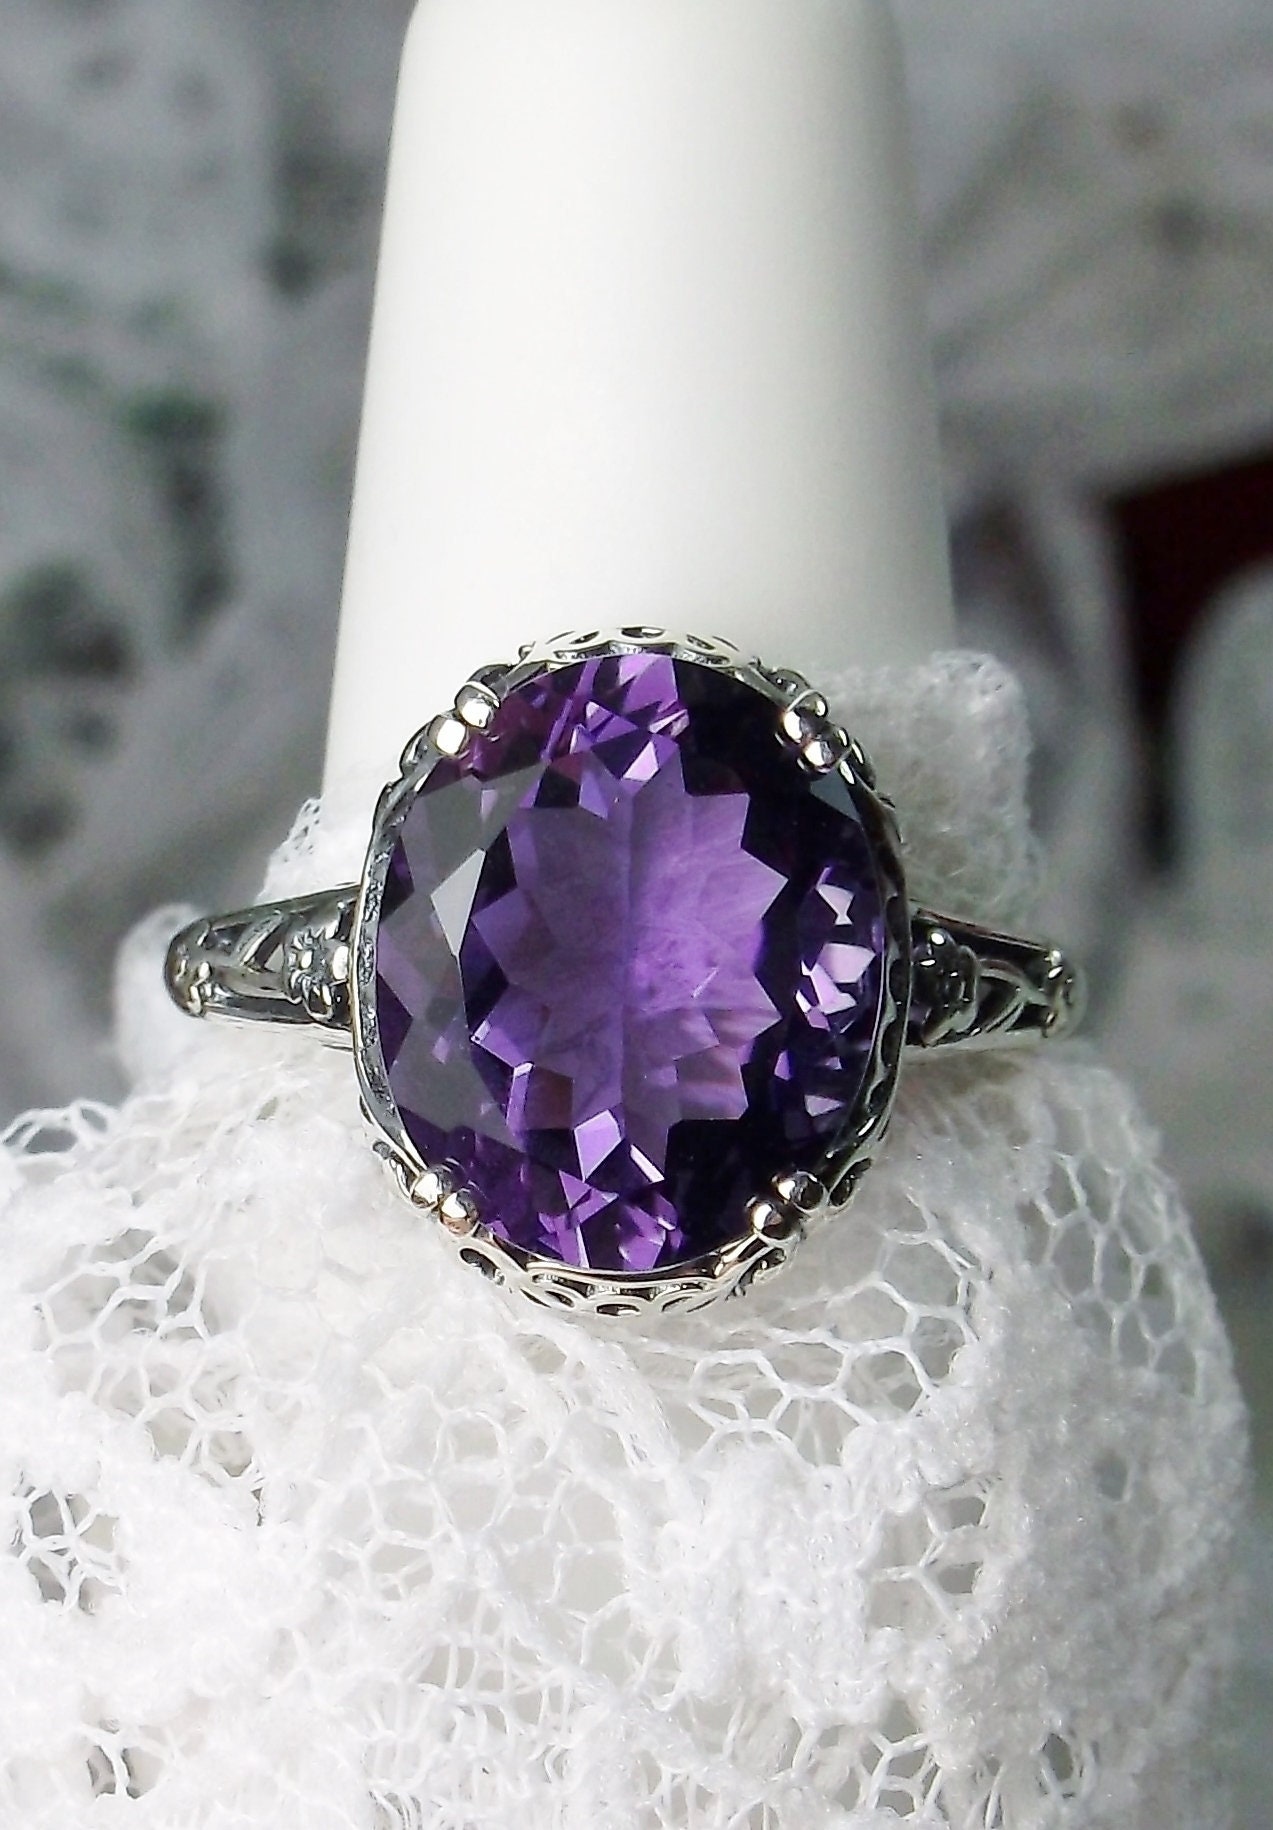 3.17ct. 3-Stone Natural Oval Shape Amethyst 925 Sterling Silver Ring S 